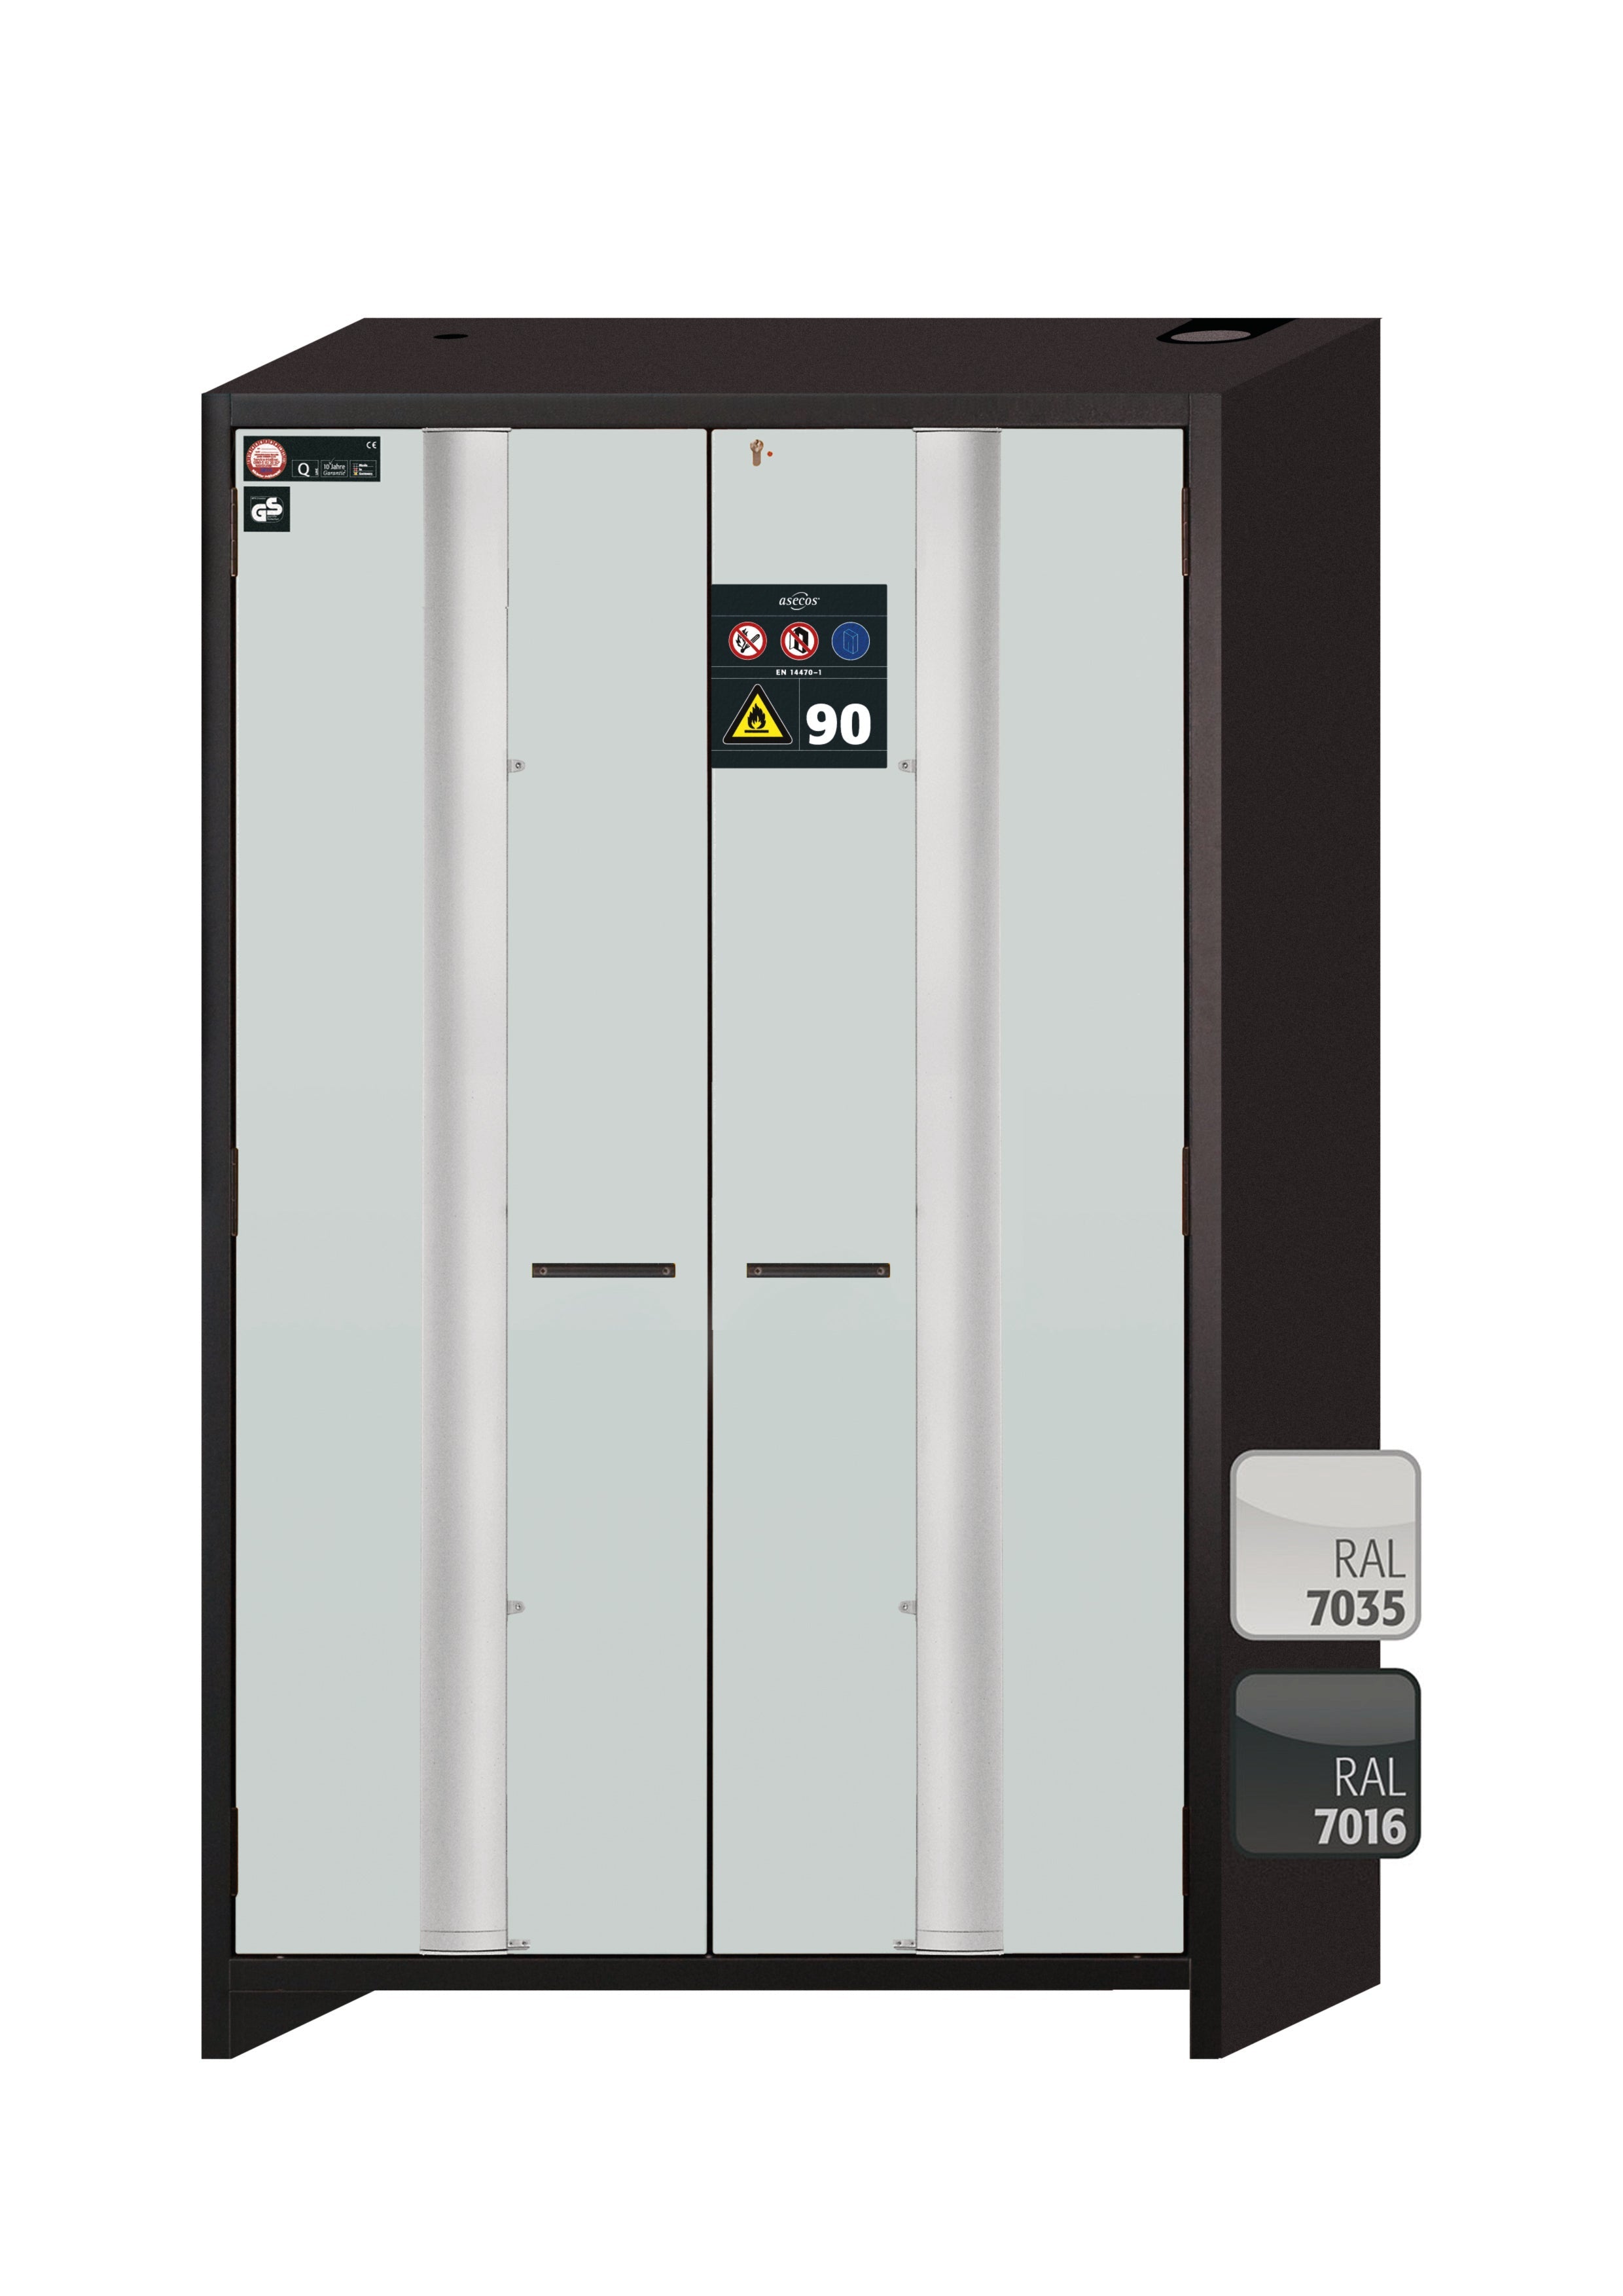 Type 90 safety cabinet Q-PHOENIX-90 model Q90.195.120.FD in light gray RAL 7035 with 5x standard pull-out tray (sheet steel)